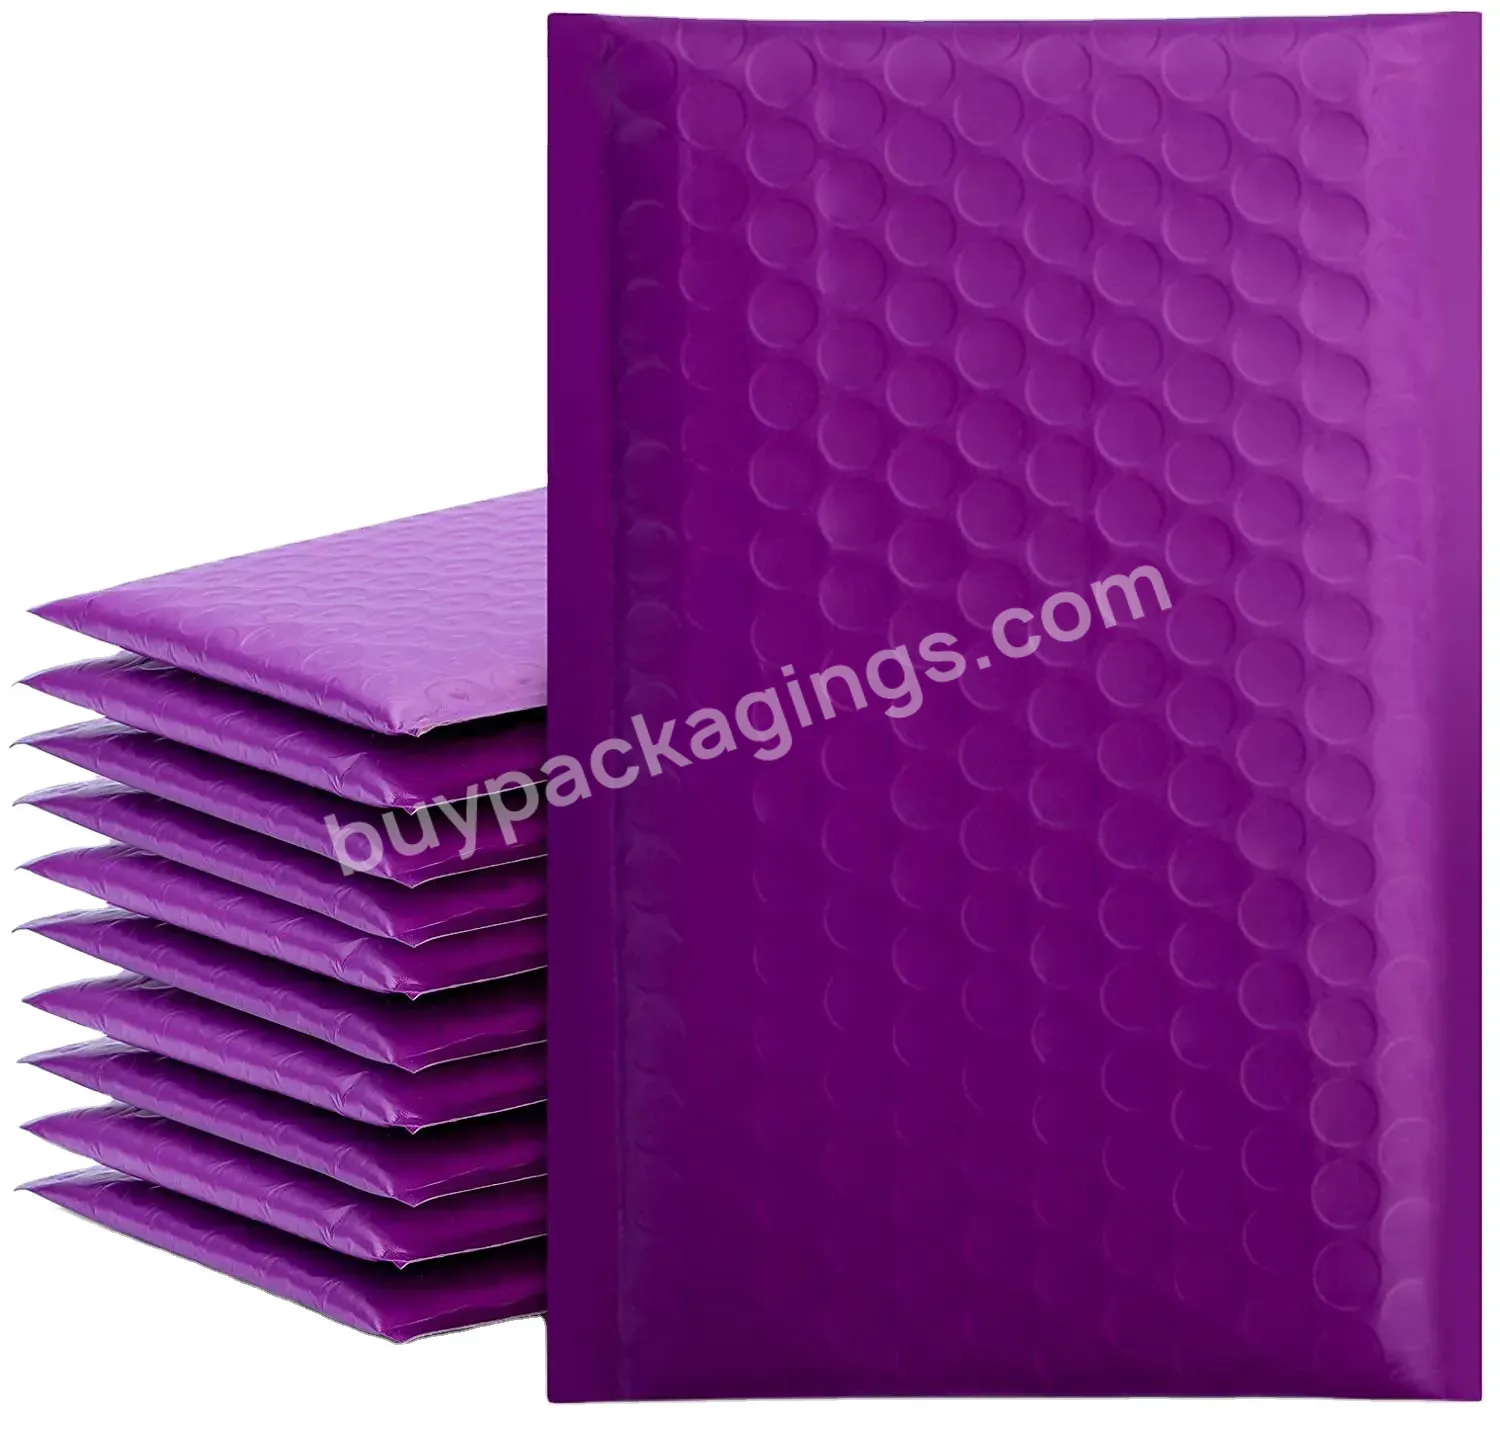 2021 Hot Sale New Material Purple Padded Envelopes Bubble Envelopes Bags Mailers Padded - Buy Bubble Padded Envelopes Mailer,Packing Bubble Envelopes,Bubble Mailer Purple.